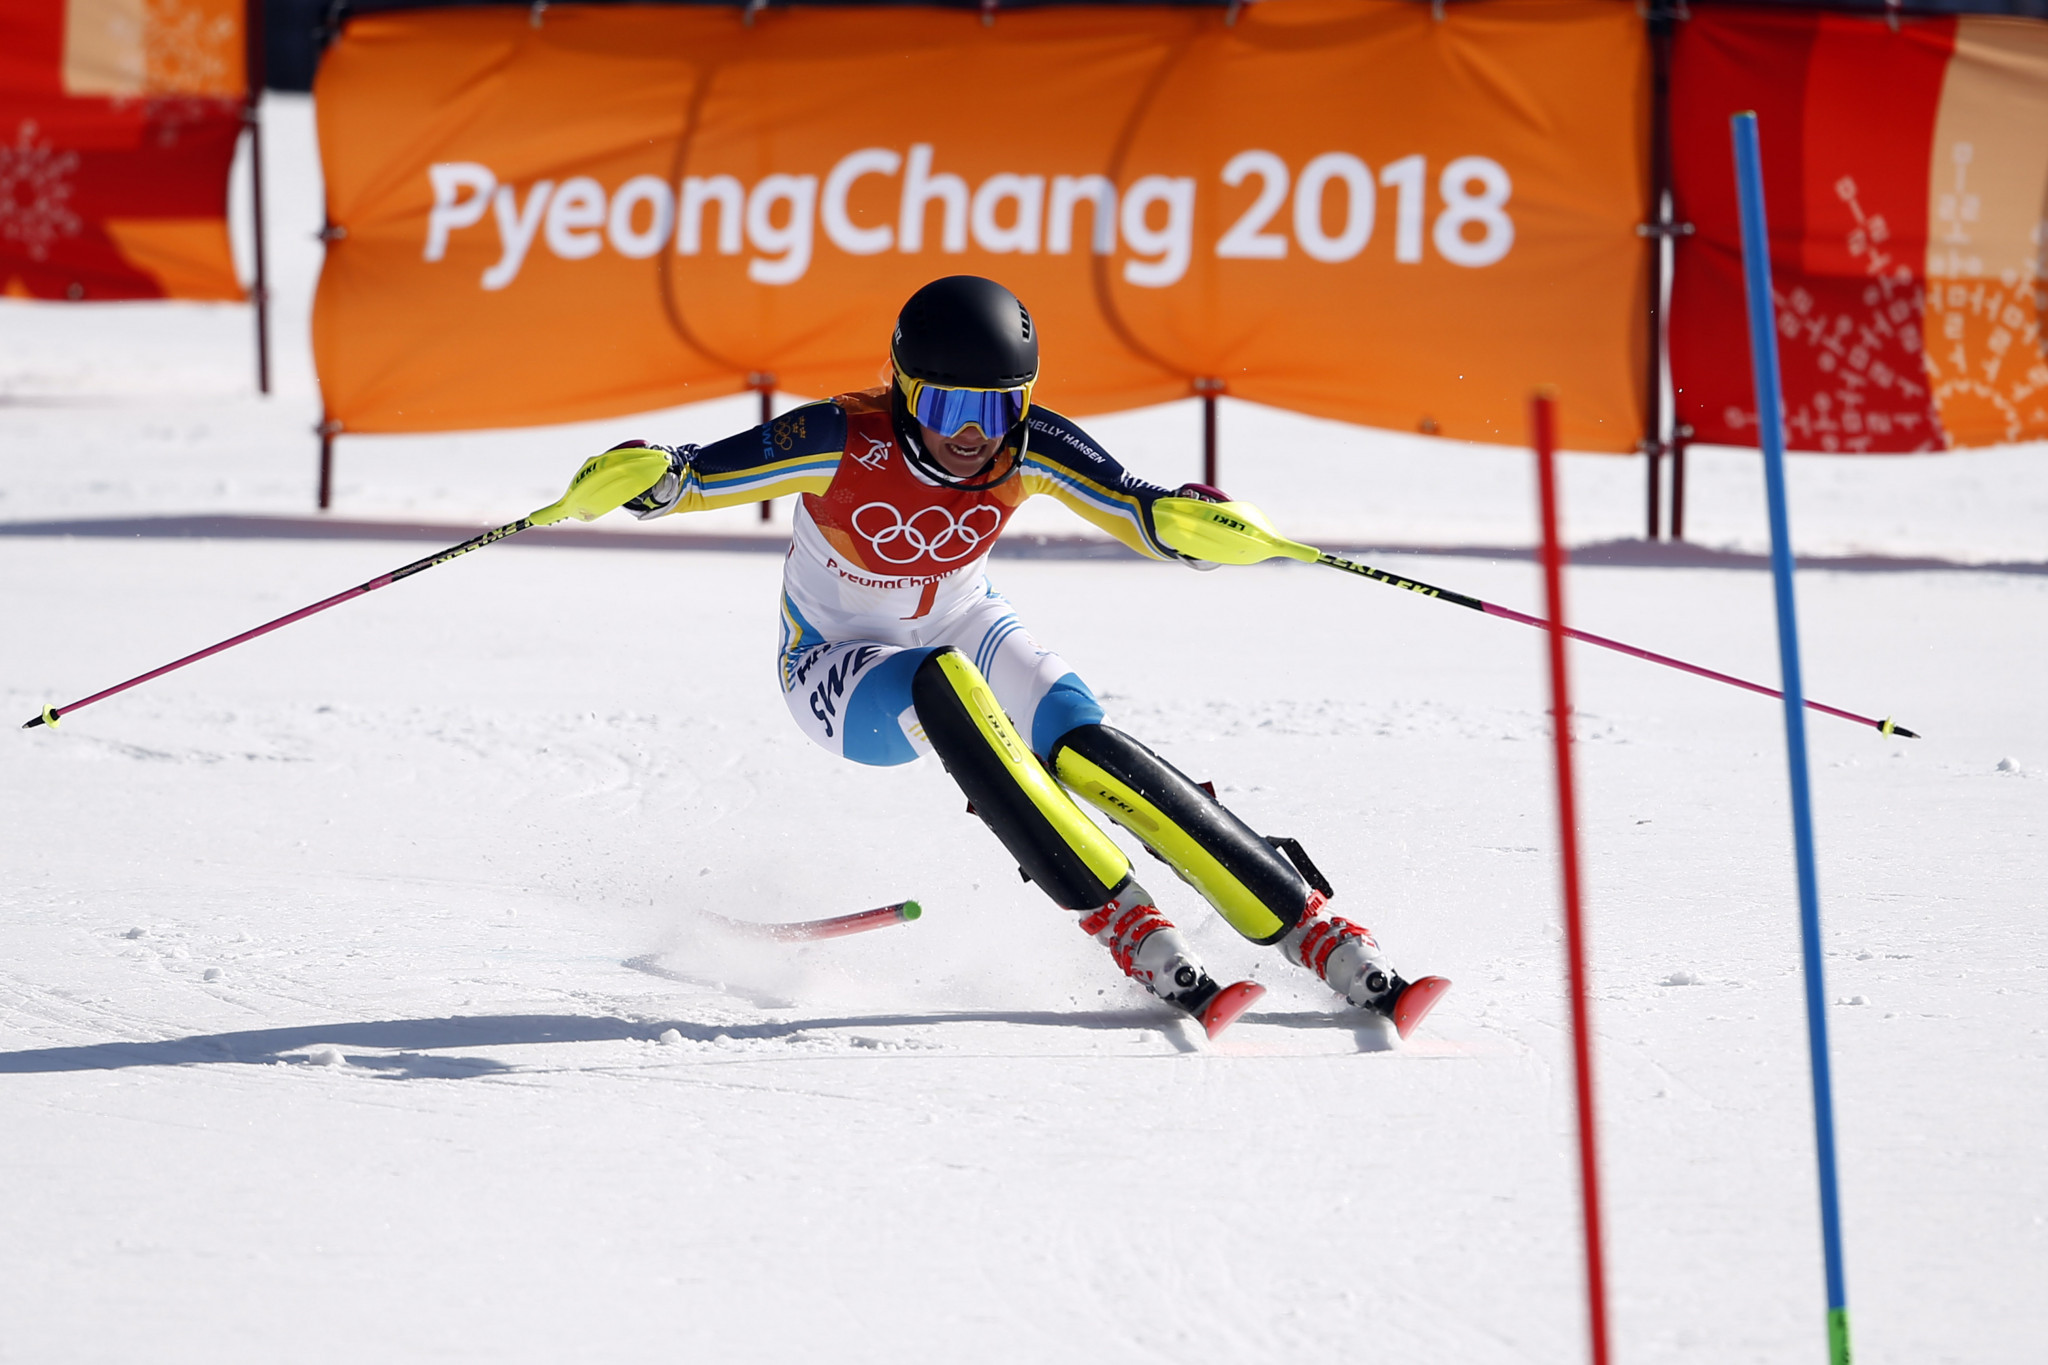 Hansdotter chooses perfect moment for first major gold medal with victory in women's slalom at Pyeongchang 2018